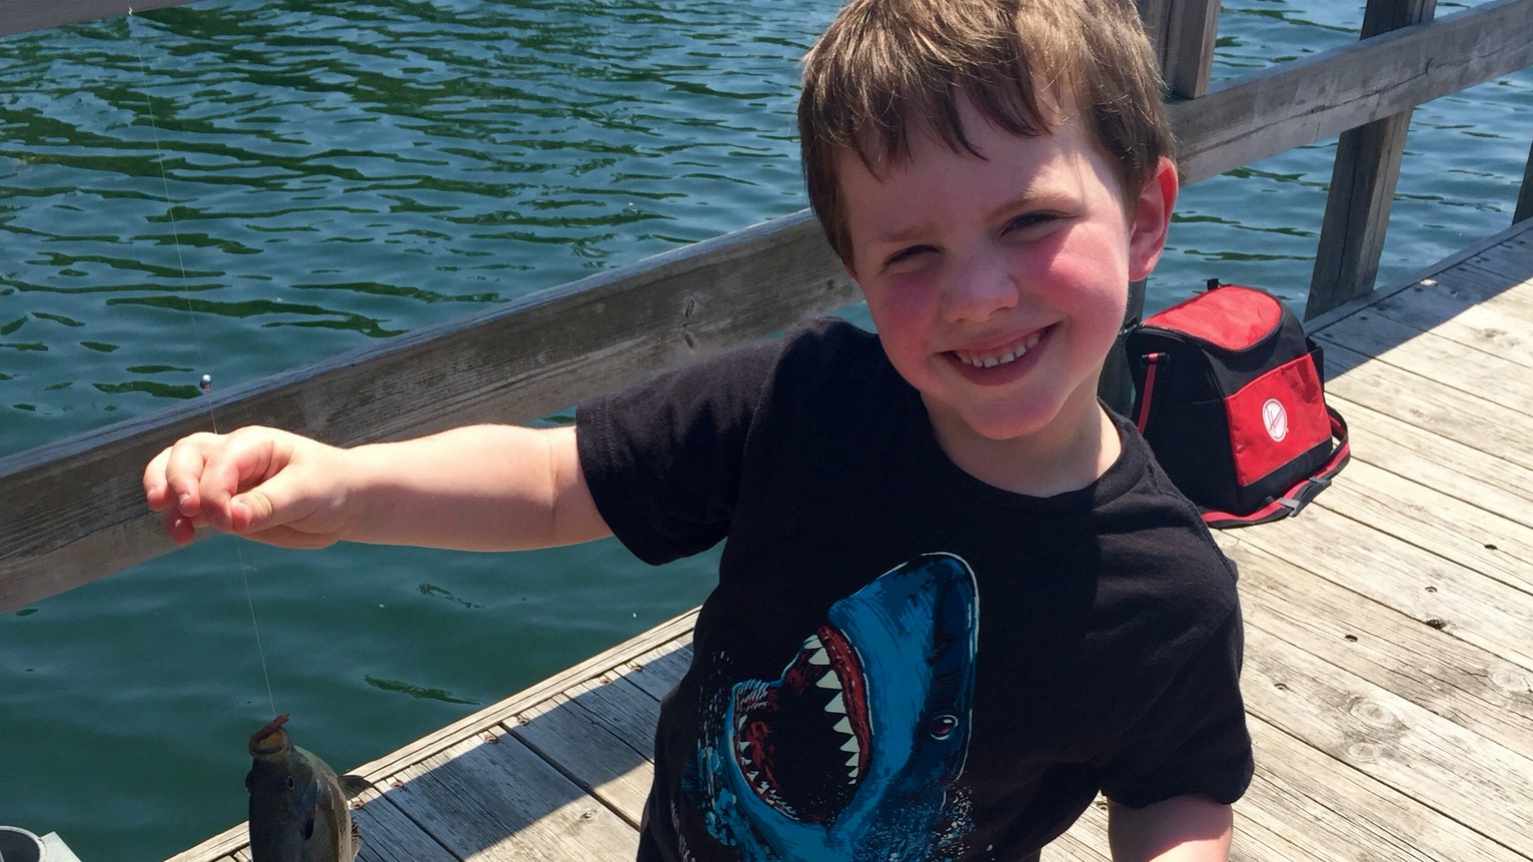 patient Gus on a fishing dock smiling and holding a fish